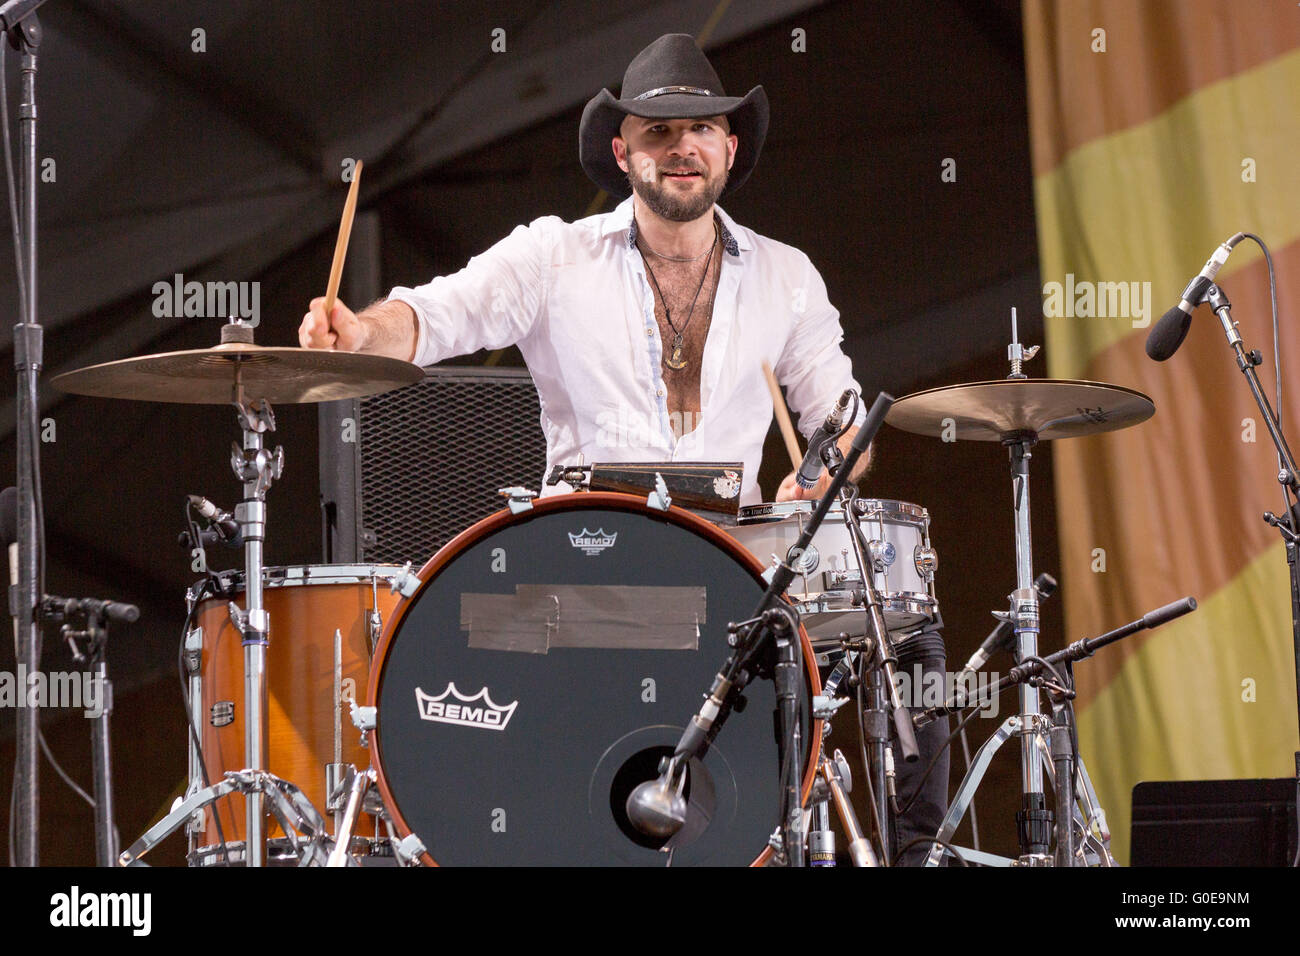 New Orleans, Louisiana, USA. 30th Apr, 2016. Drummer JOE SAYLOR of Stay Human performs live with Jon Batiste during the New Orleans Jazz & Heritage Festival at Fair Grounds Race Course in New Orleans, Louisiana © Daniel DeSlover/ZUMA Wire/Alamy Live News Stock Photo